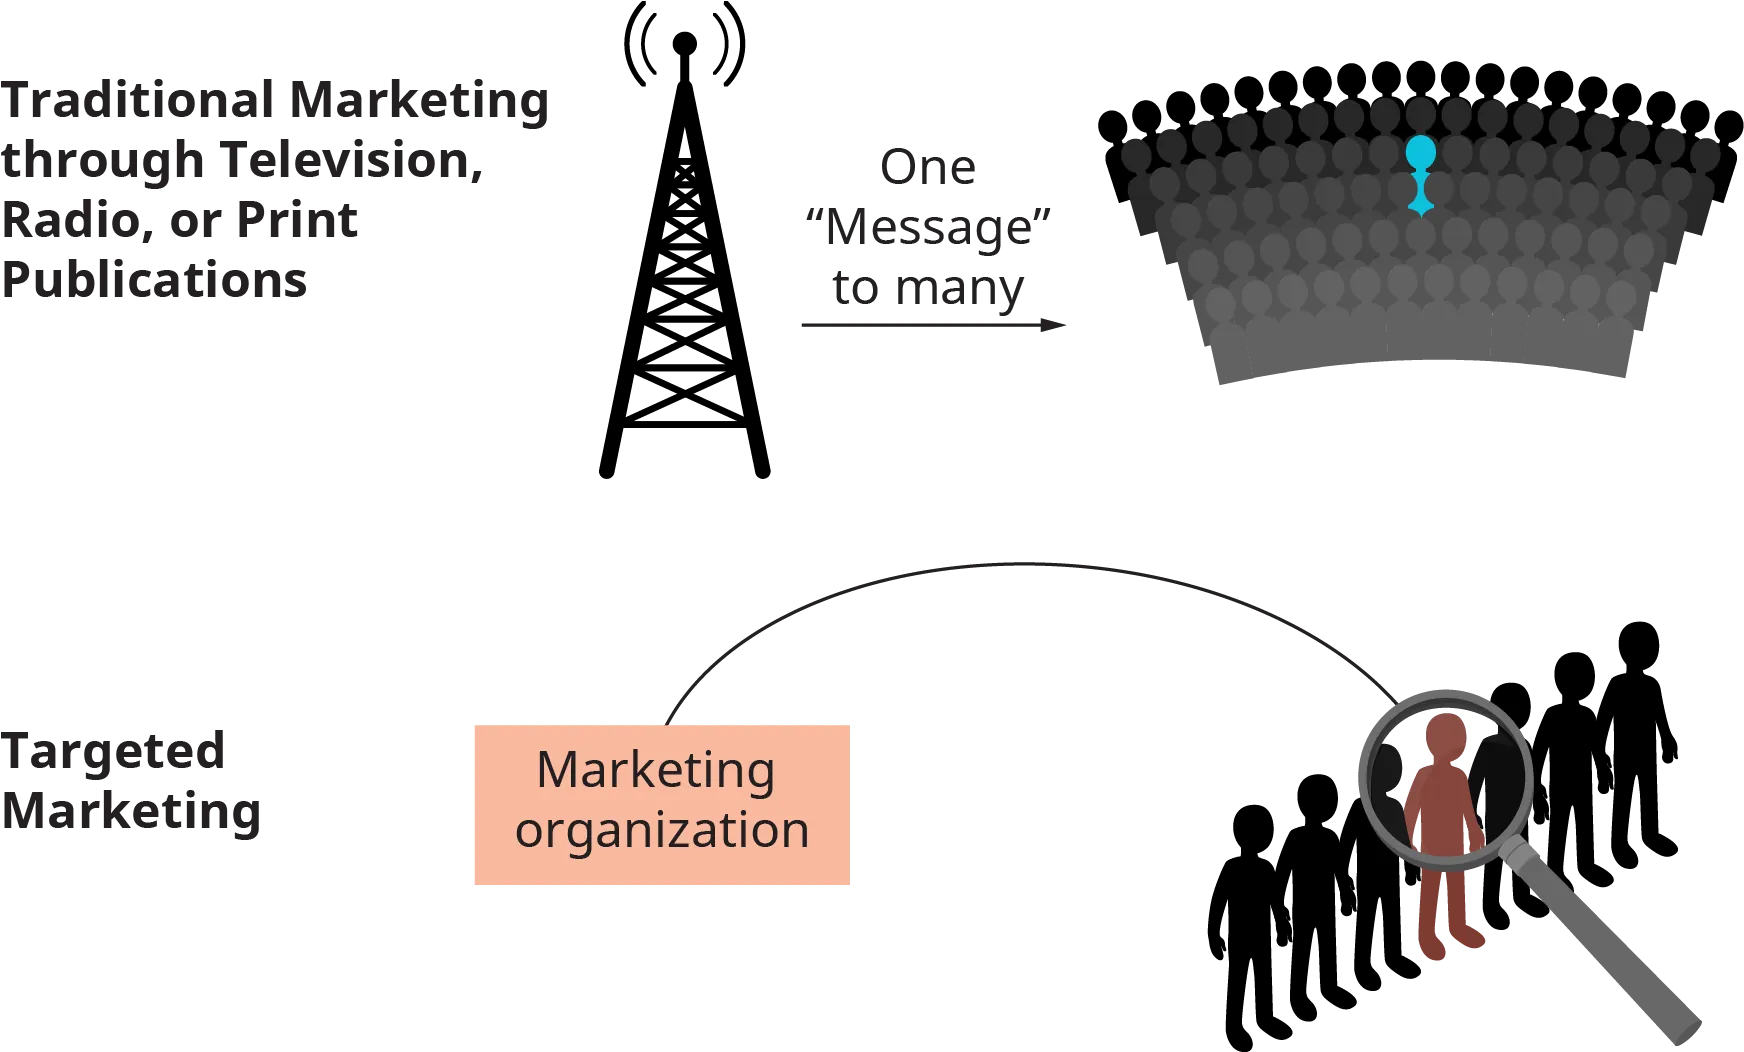 Two types of marketing are shown. Targeted marketing is shown as a marketing organization focusing on an individual in a group. Traditional marketing through television, radio, or print publications is shown as a radio tower broadcasting on message to many, or a large audience.